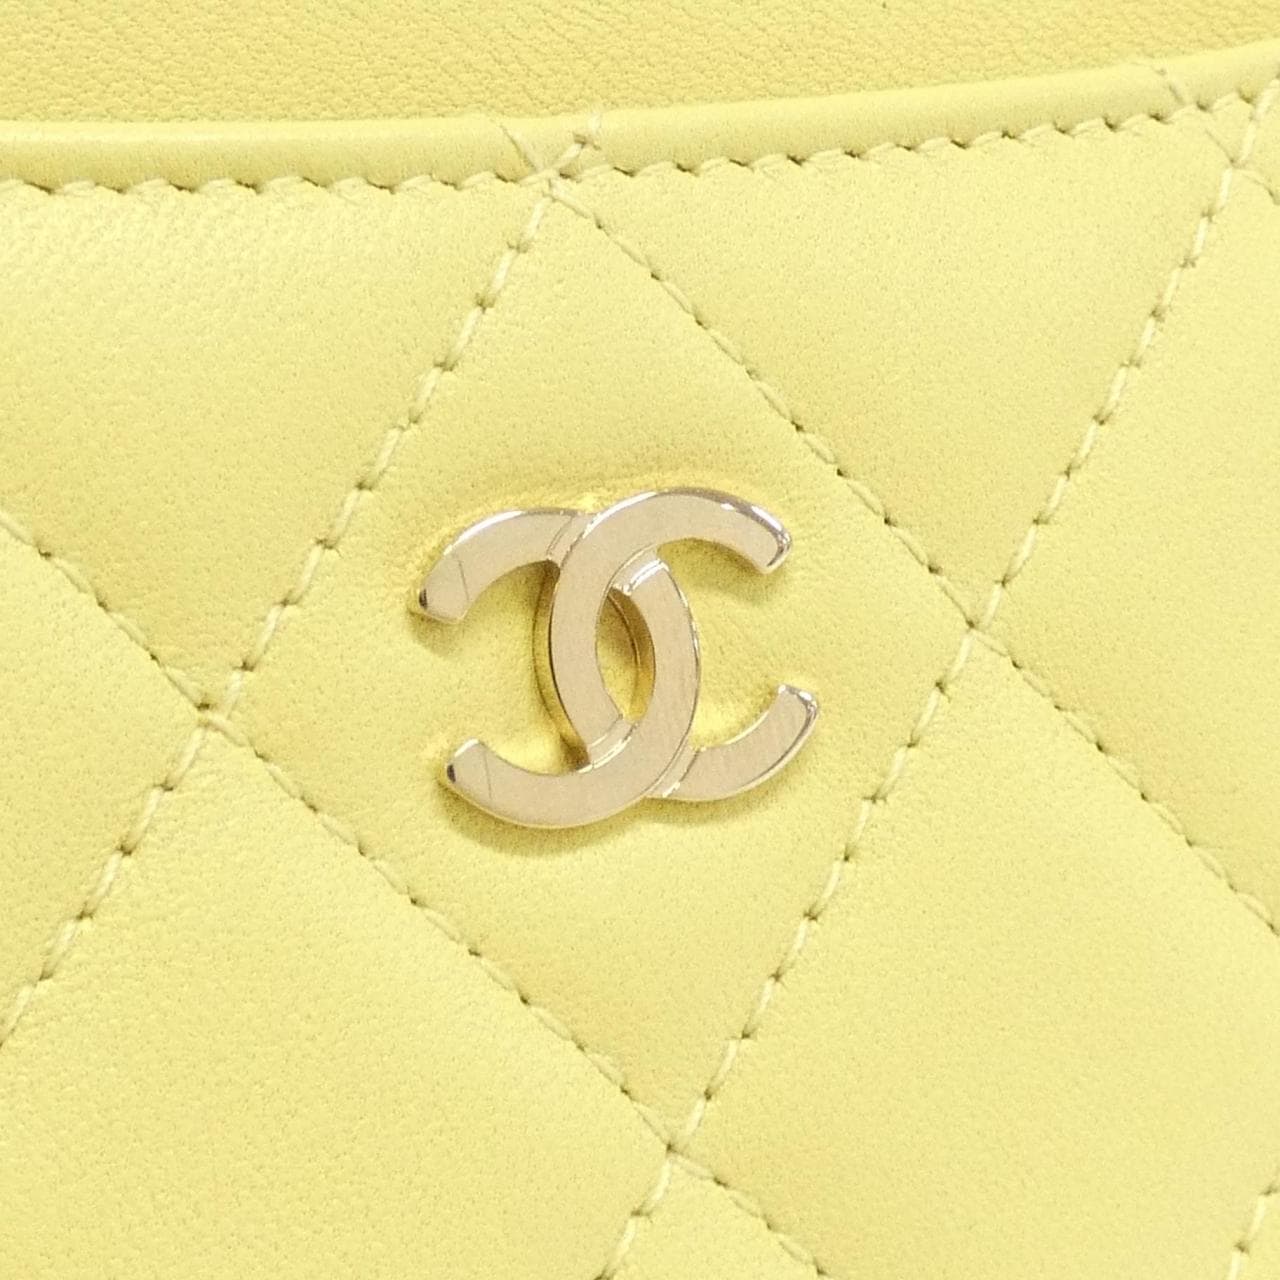 CHANEL Timeless Classic Line 84107 Pouch